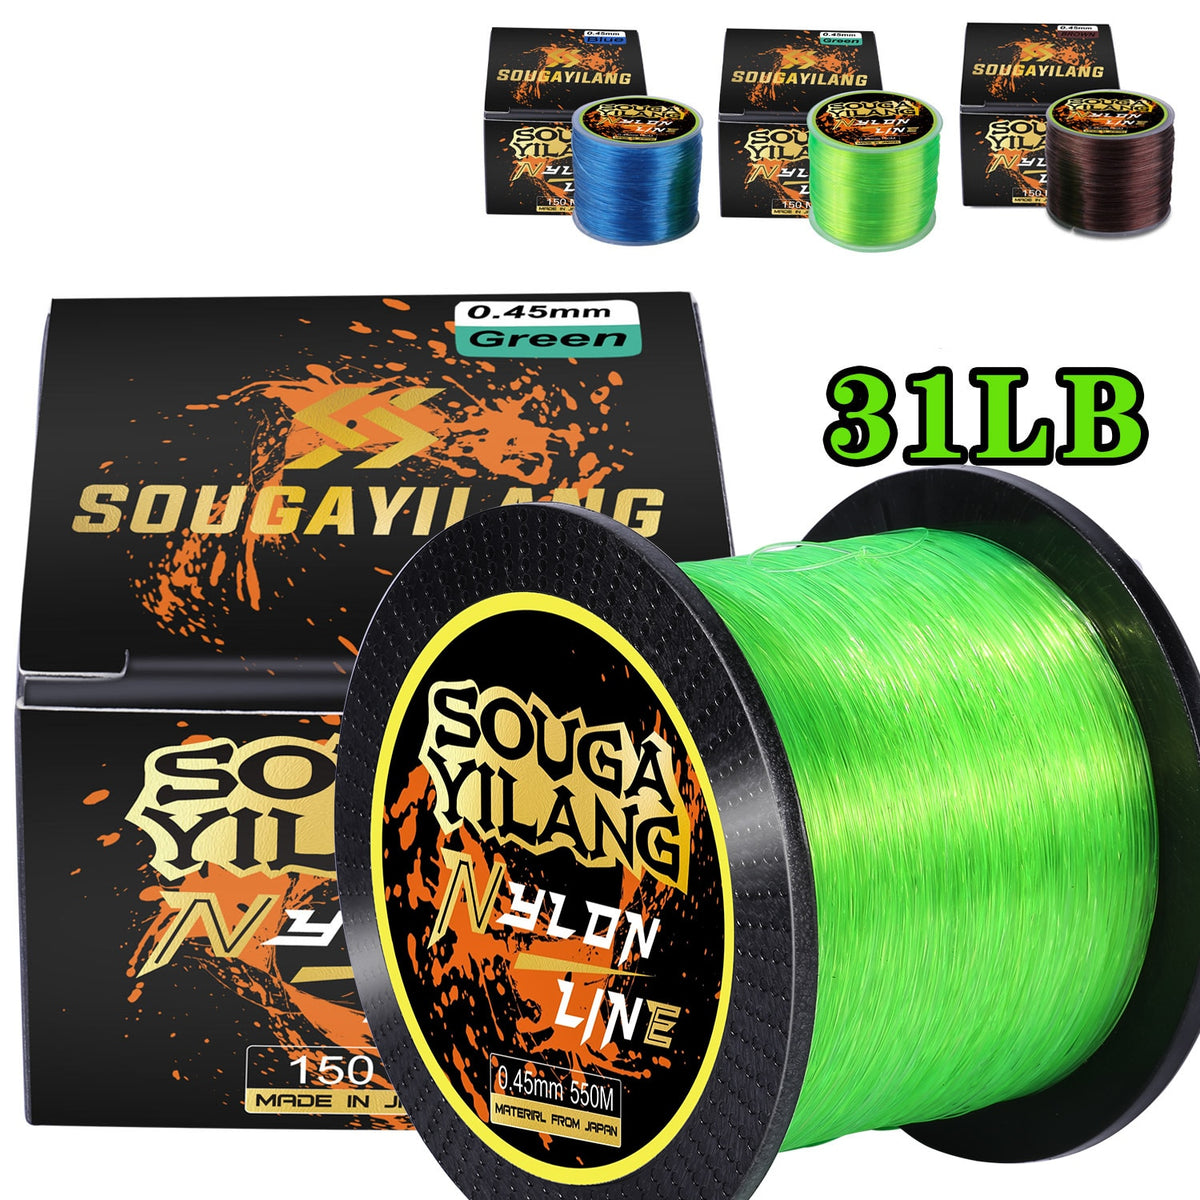 0.70 MM Nylon Fishing Line, For For Catching Fish, Size: 45 M